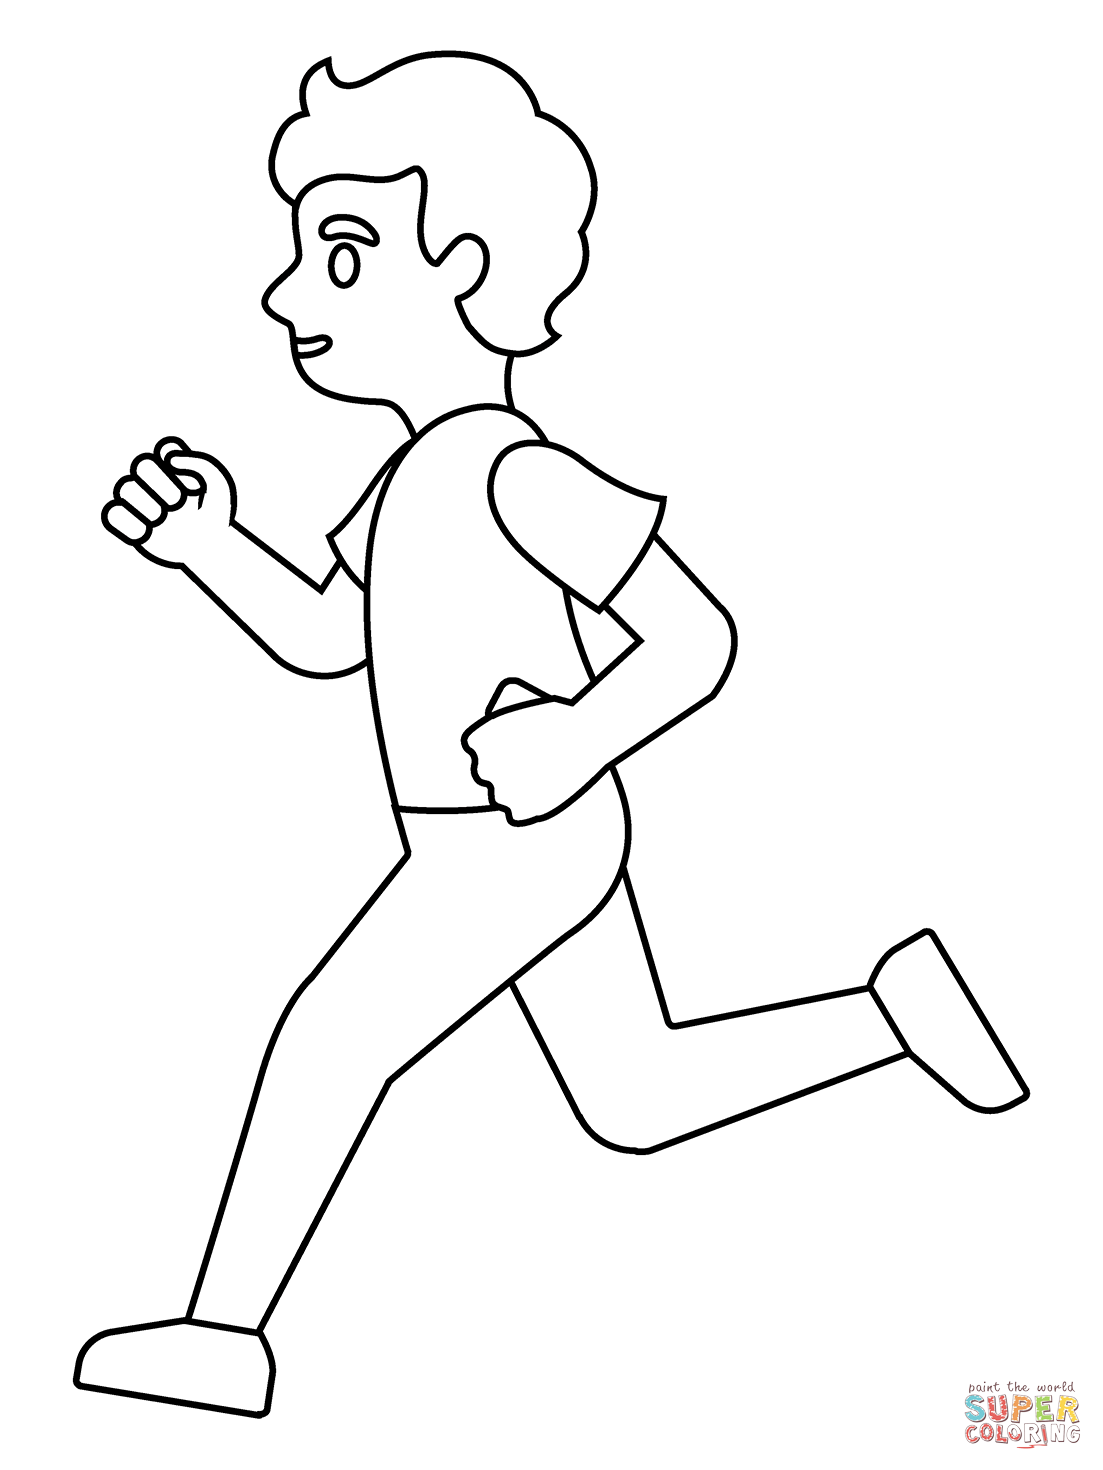 Person running emoji coloring page free printable coloring pages